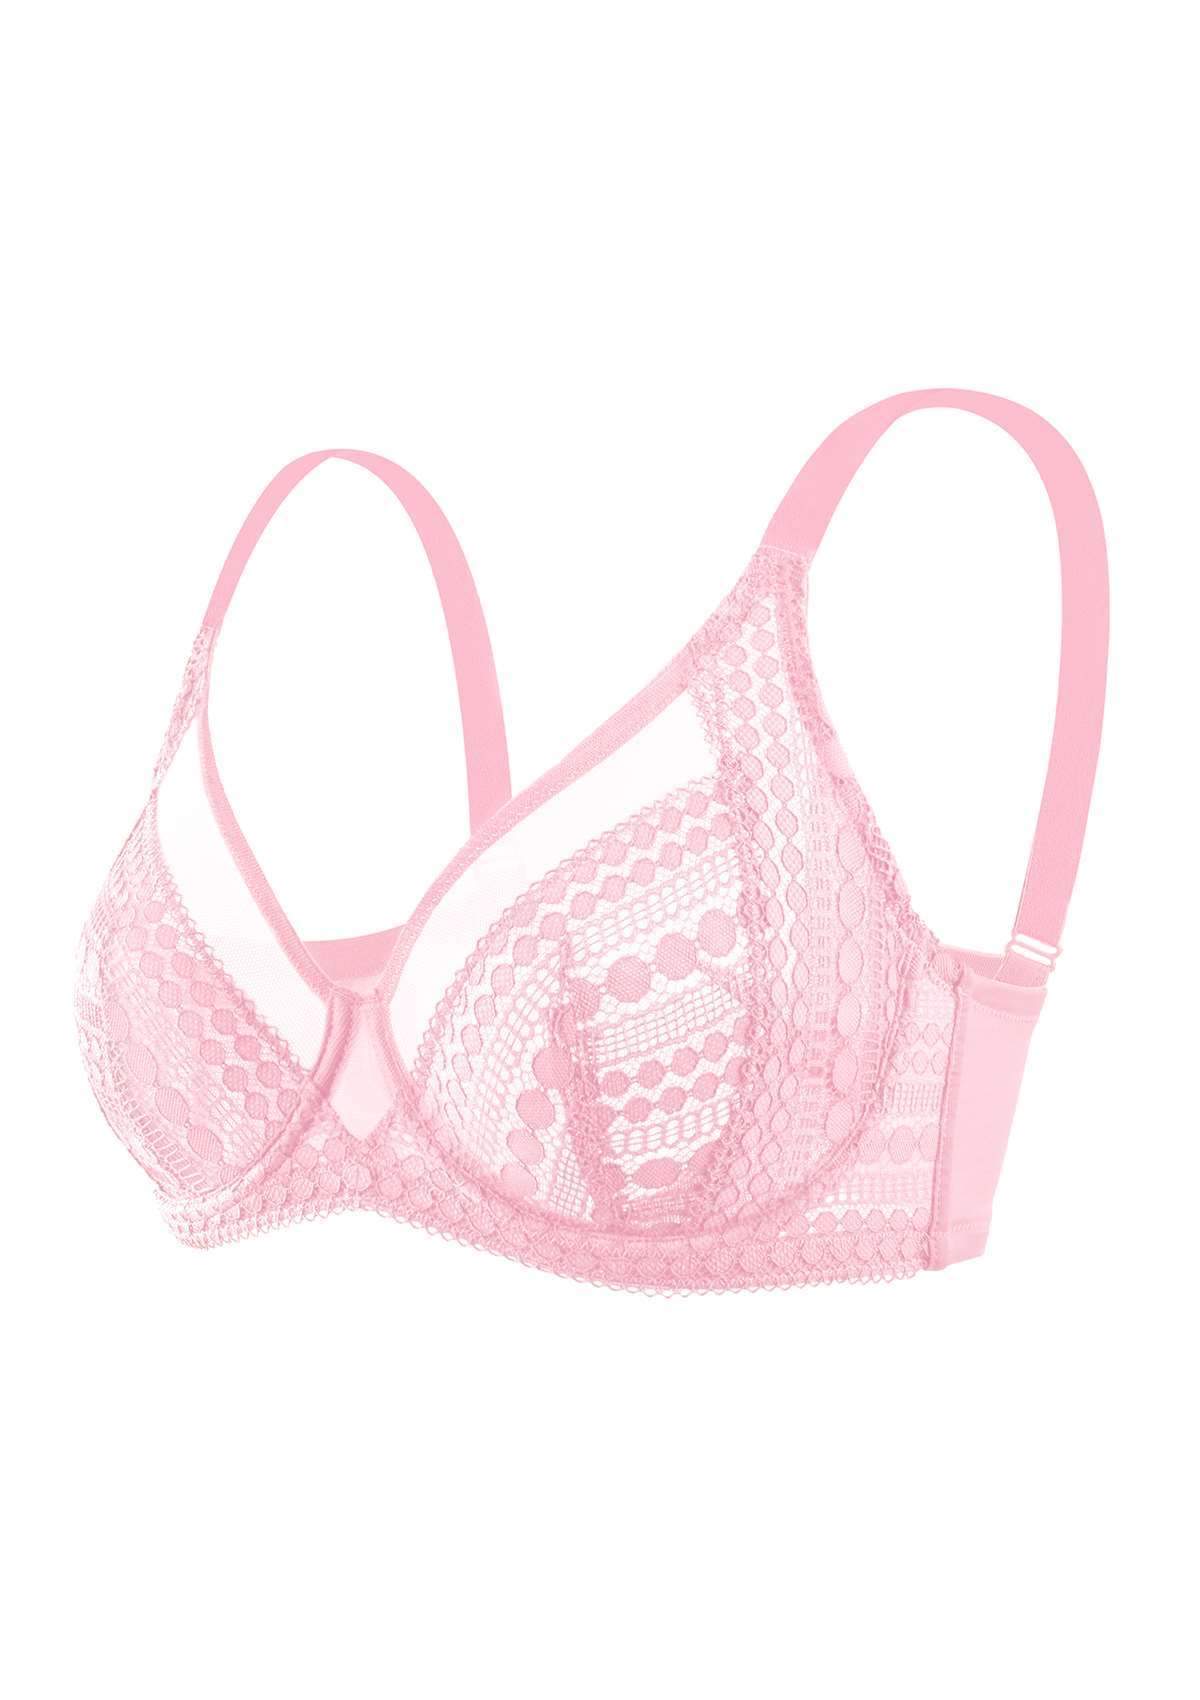 HSIA Heroine Lace Bra And Panties Set: Most Comfortable Supportive Bra - Pink / 44 / DDD/F